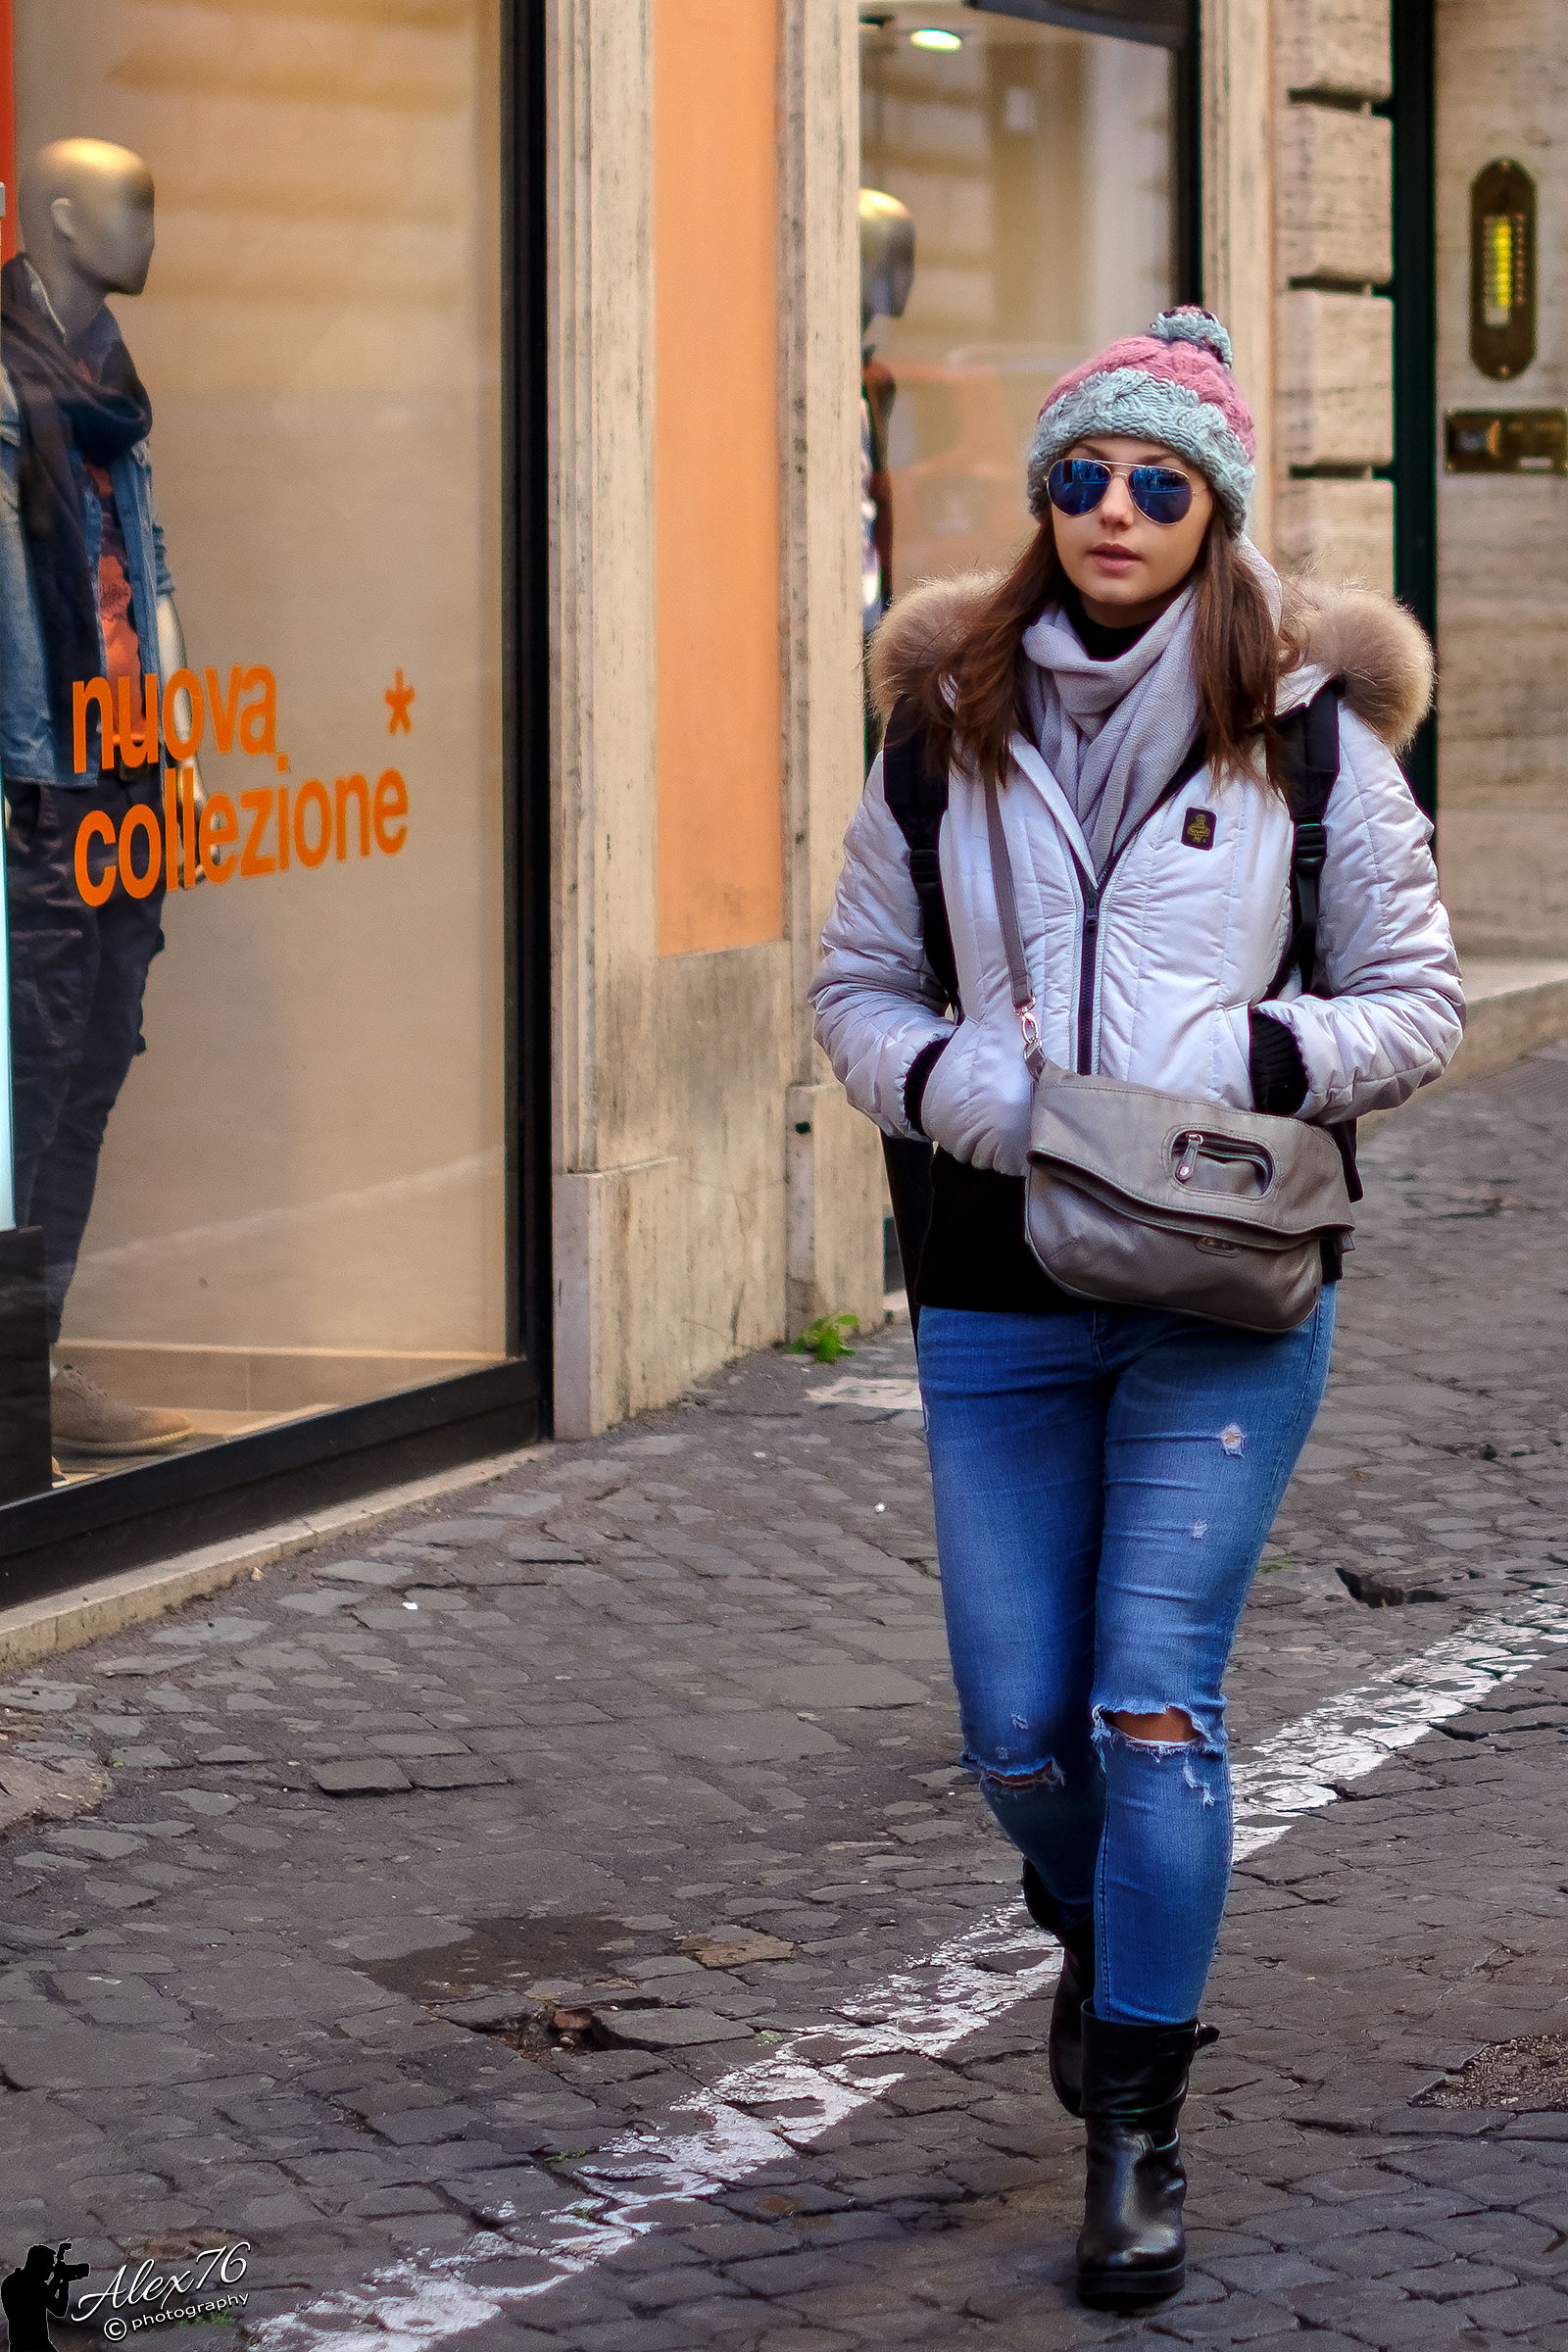 Fashion in the streets of Rome...